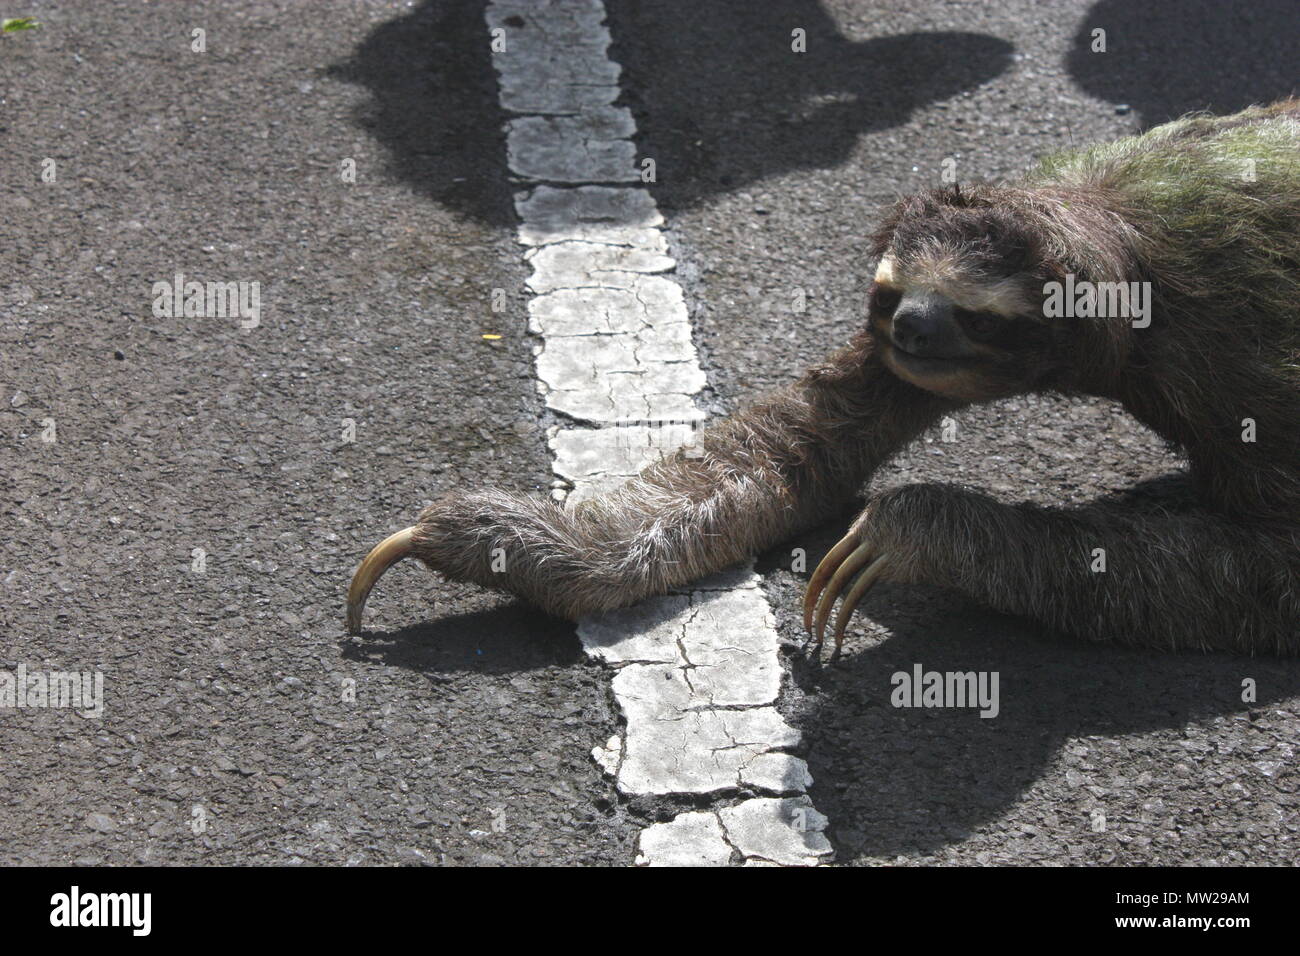 Sloth crossing the road Stock Photo